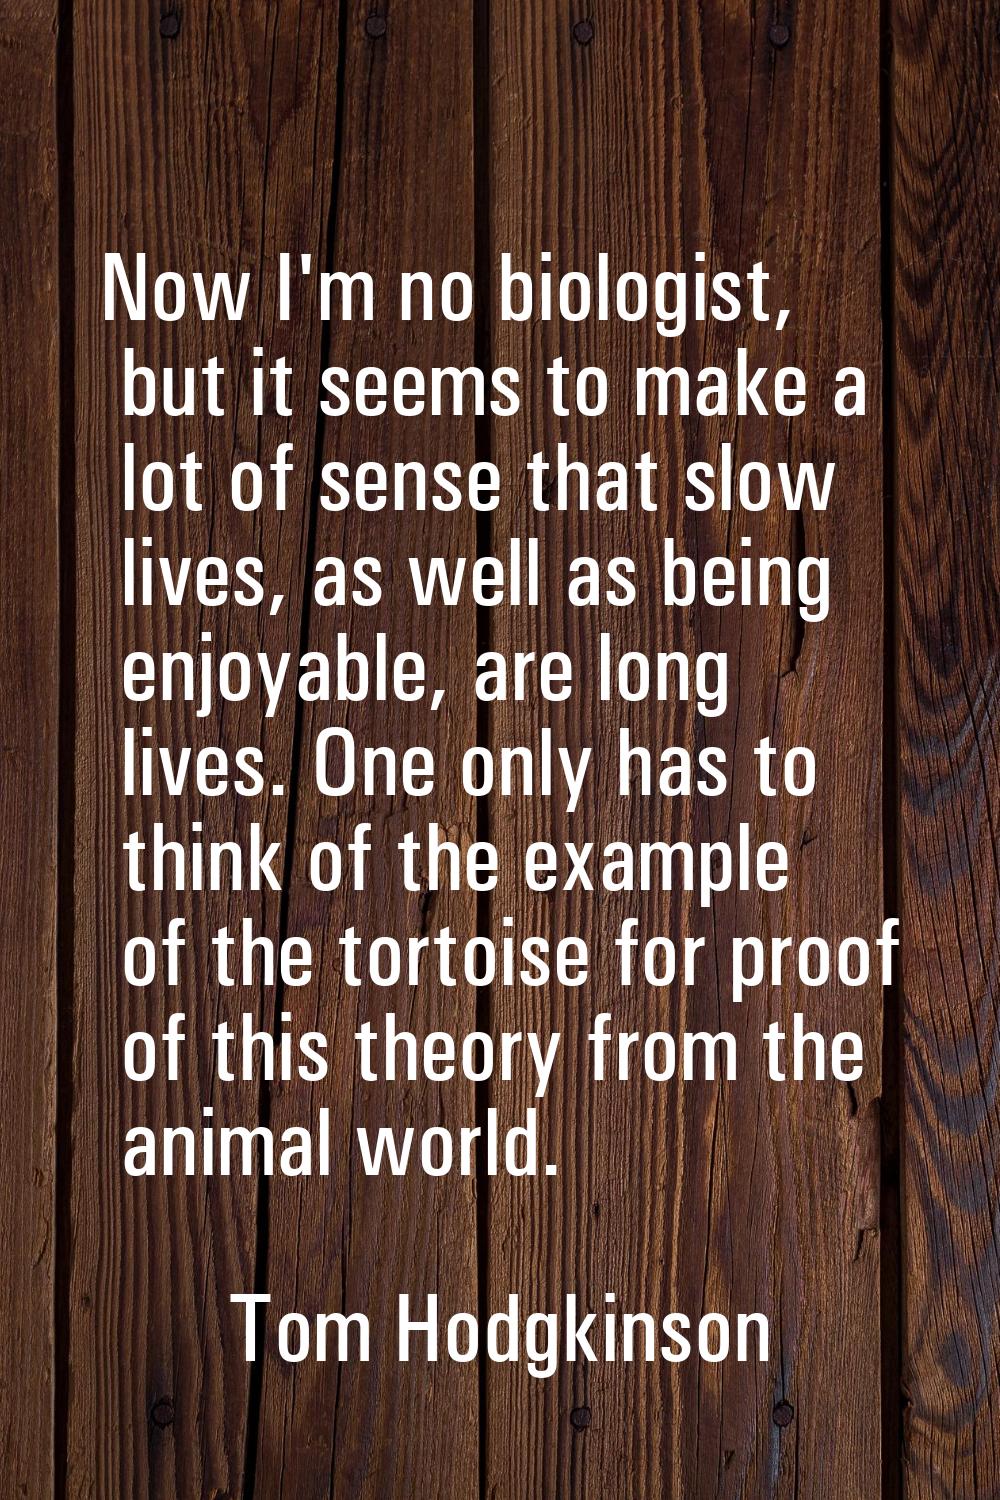 Now I'm no biologist, but it seems to make a lot of sense that slow lives, as well as being enjoyab